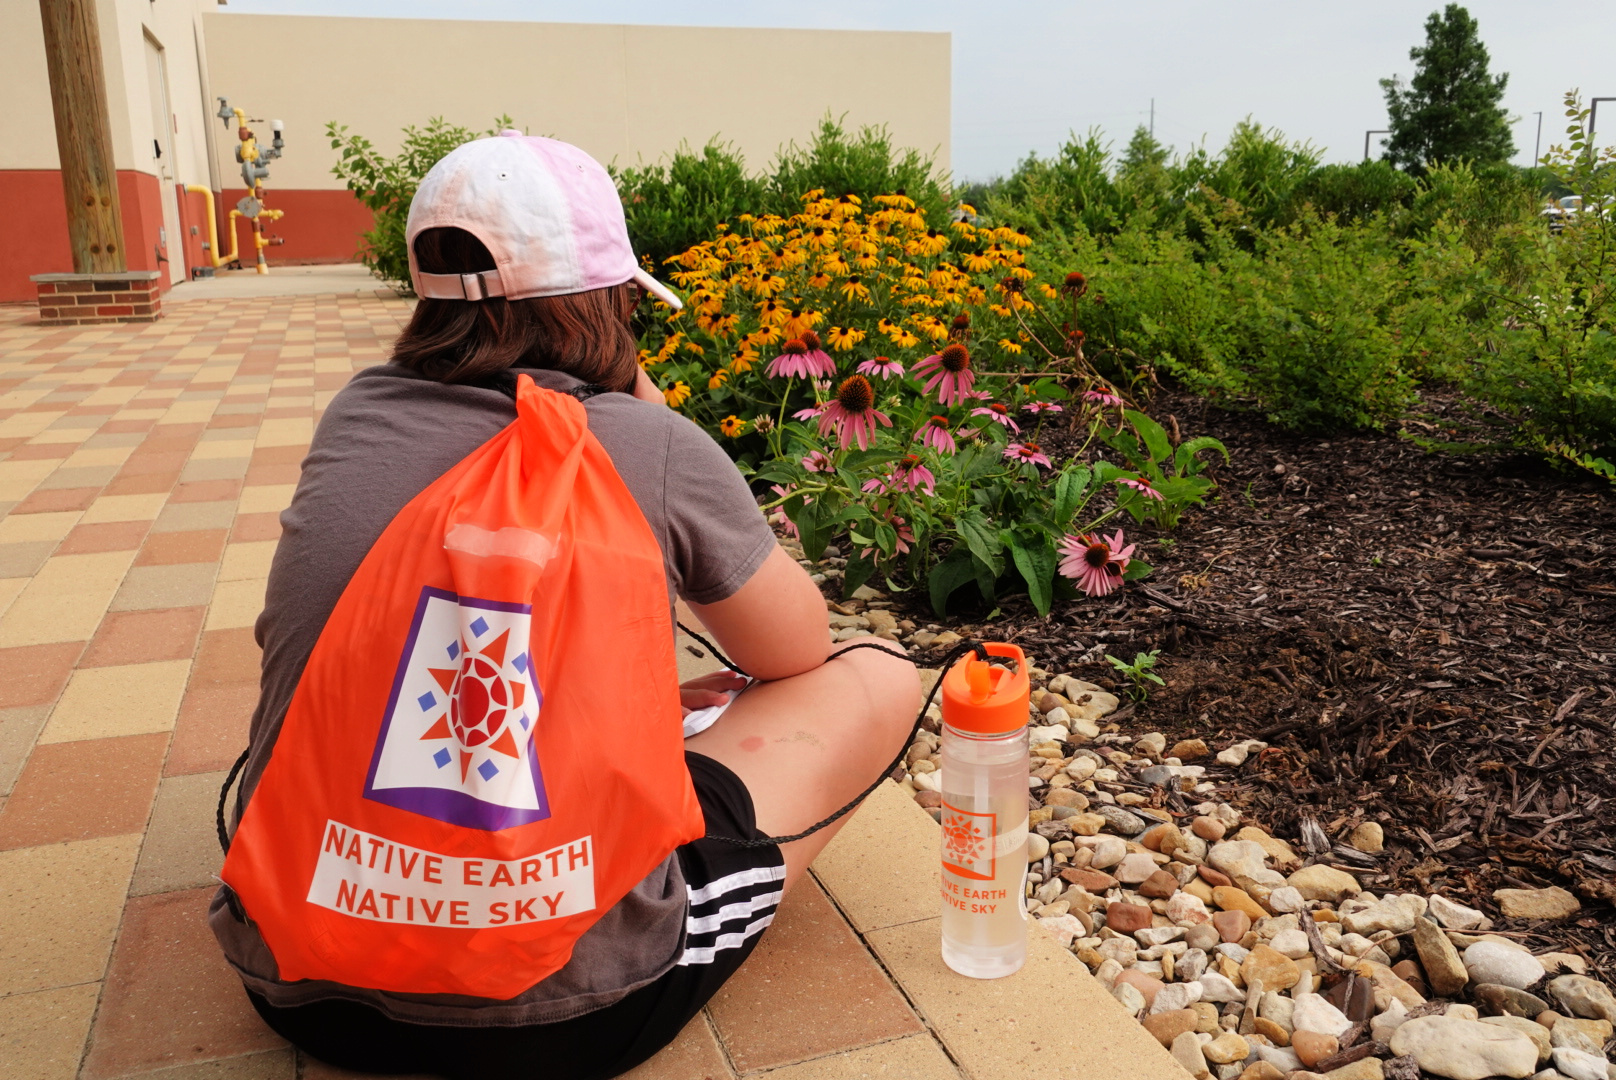 Photo of the back of a person sitting on the ground with an orange back slung over their shoulder. The bag has the Native Earth | Native Sky logo on it.